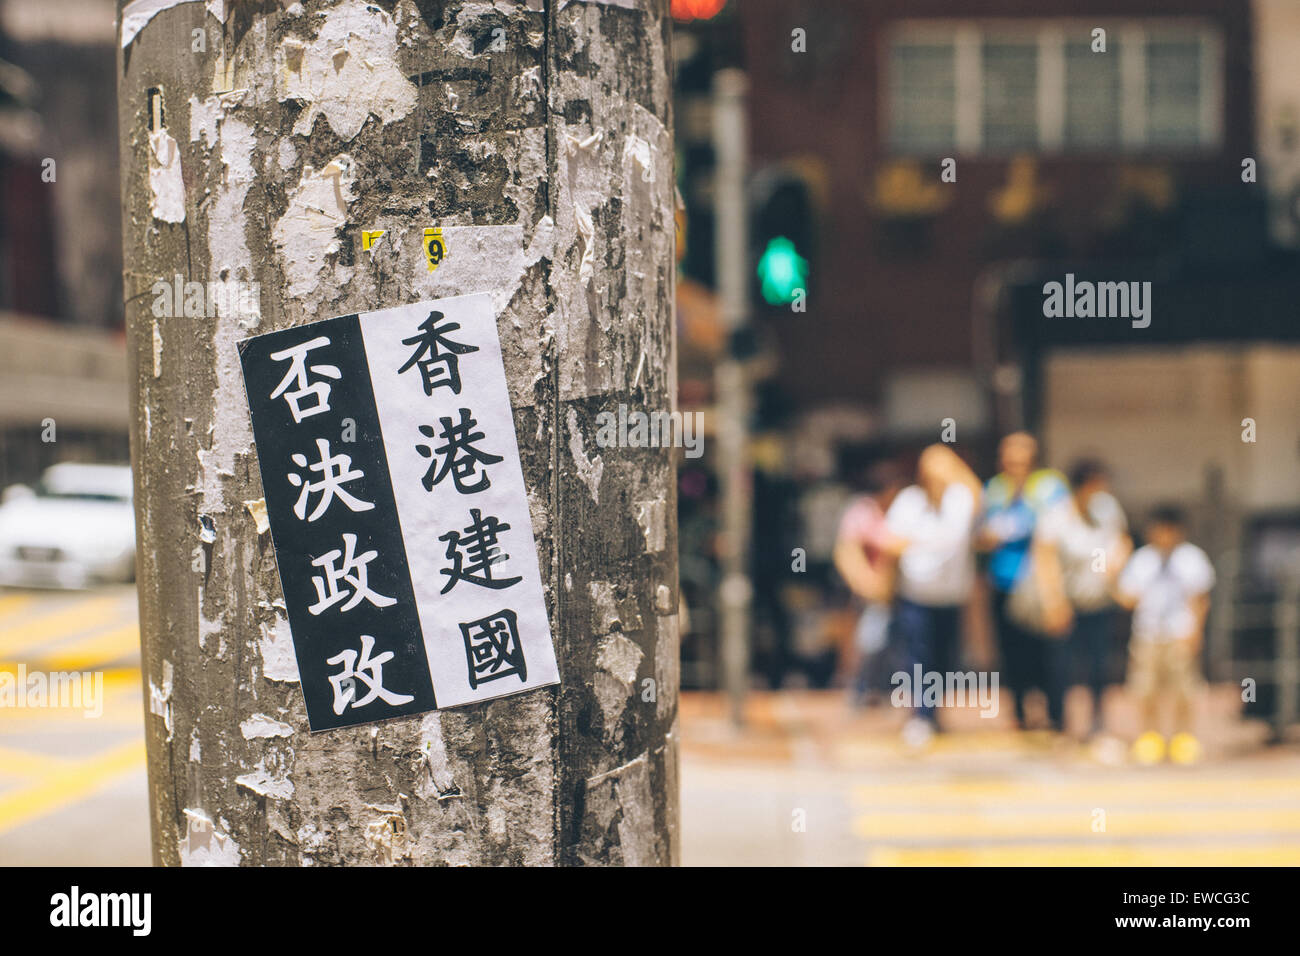 a message of hong kong political unrest posted on the pole in street. Stock Photo